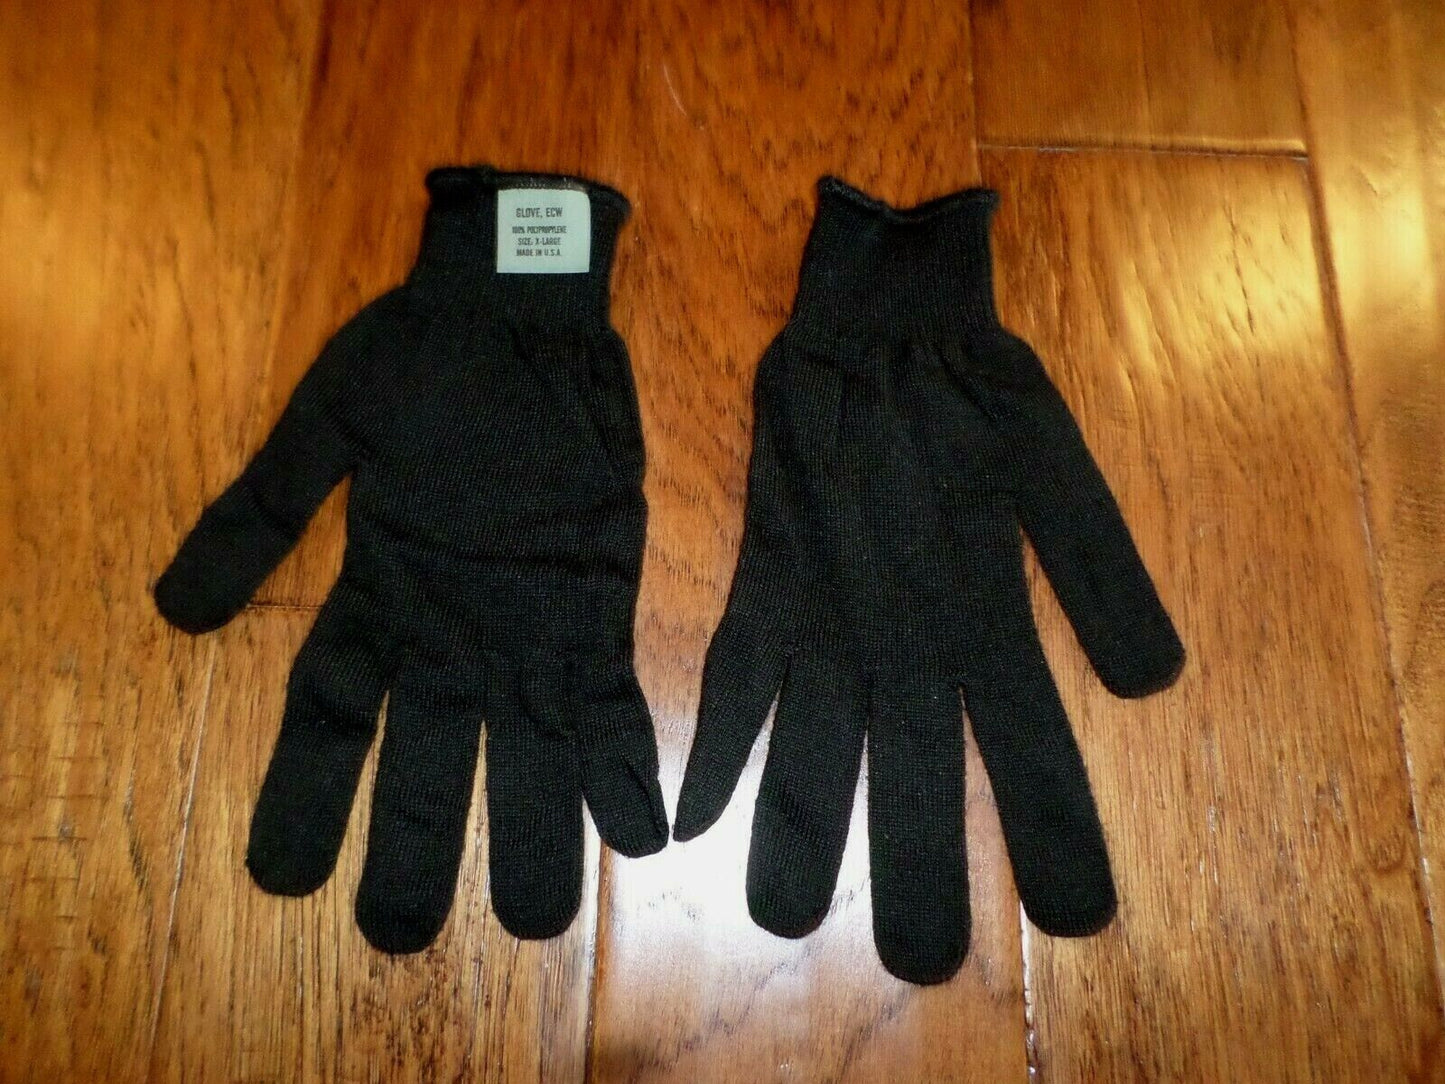 MILITARY ISSUE BLACK POLYPROPYLENE GLOVE INSERTS X-LARGE ECW MADE IN THE U.S.A